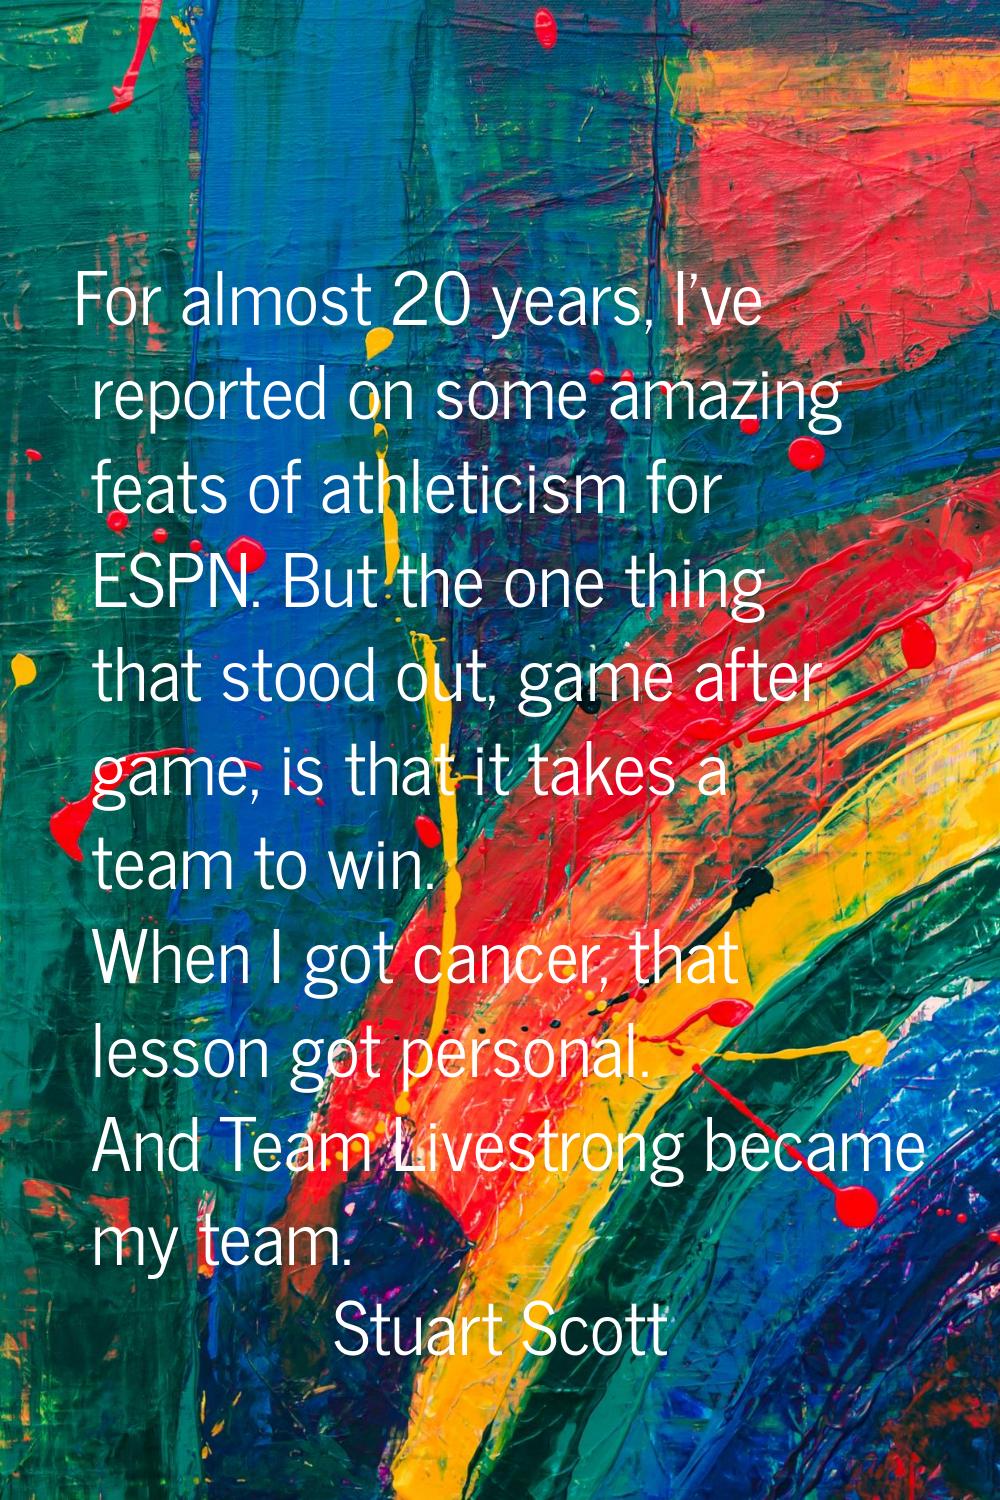 For almost 20 years, I've reported on some amazing feats of athleticism for ESPN. But the one thing